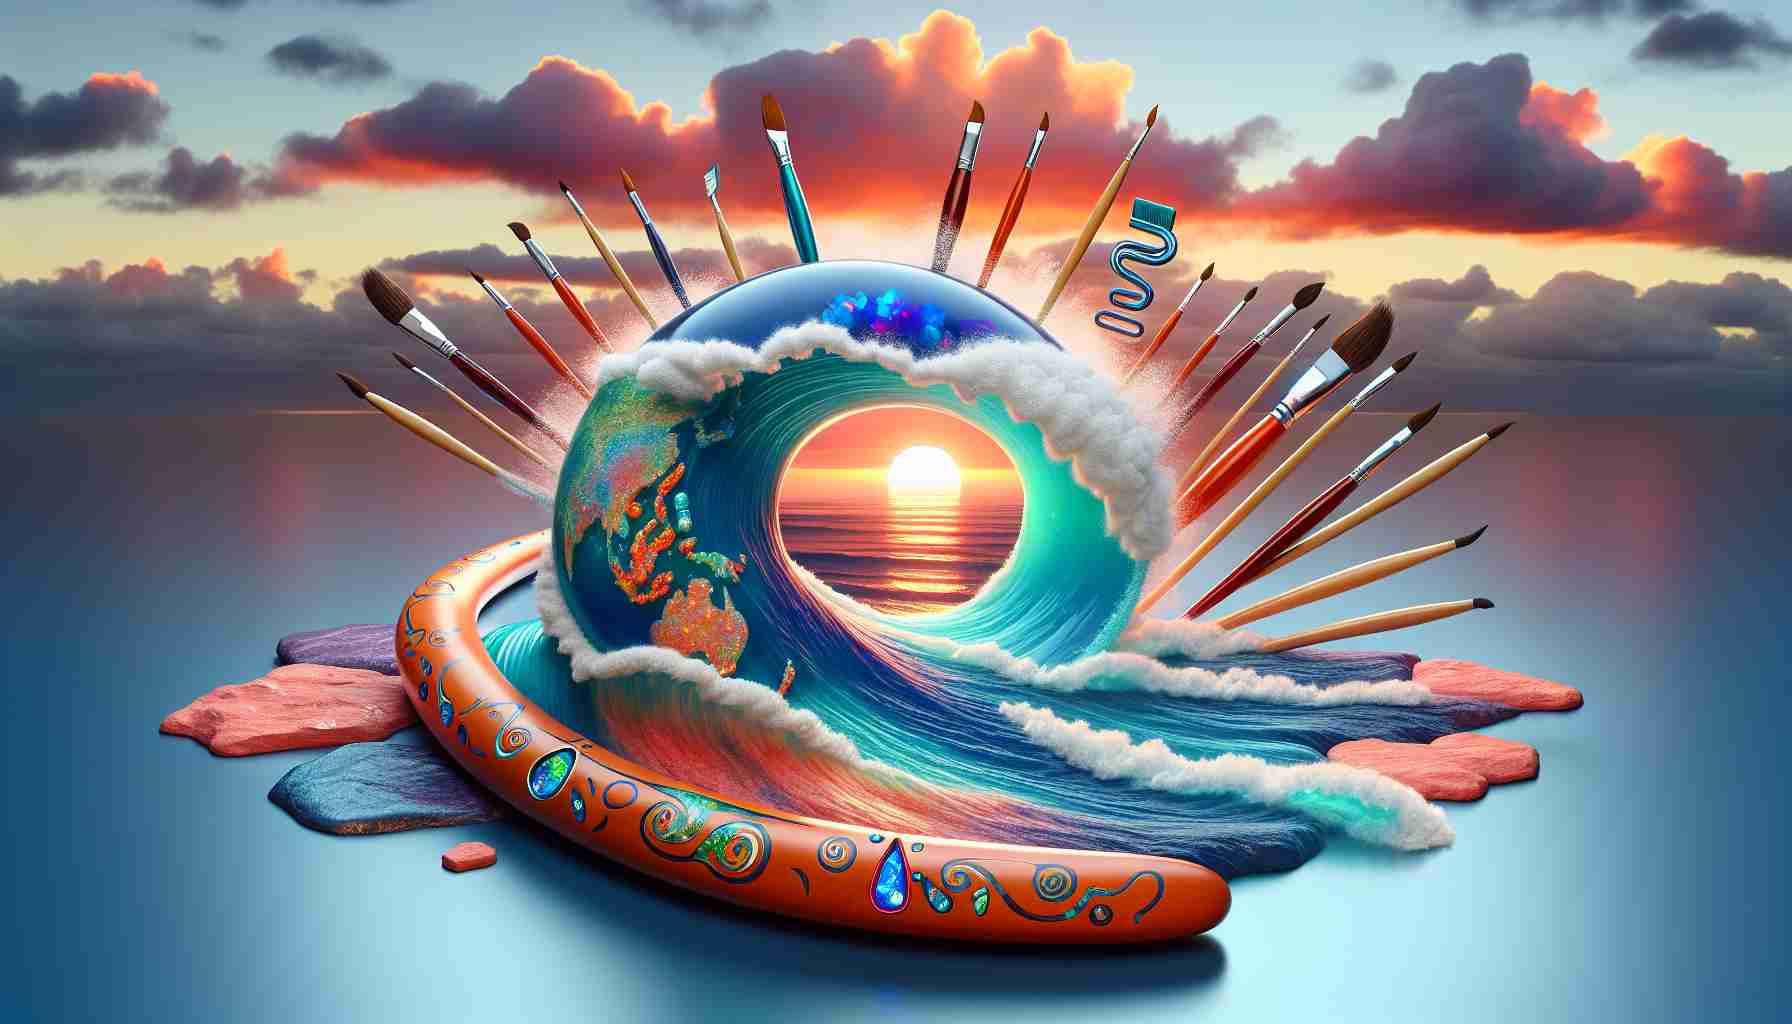 HD visualization of a conceptual representation symbolic of the New Wave Australian Arts scene. It can show items such as a wave carved of opal gemstone, representative of national treasure, circumventing a globe, indicating the worldwide spread of the art. Add A boomerang with paintbrushes and pencils tied to it, cruising the wave, stands for indigenous heritage and creativity. The sky in the backdrop could be a vibrant sunset with streaks of orange and pink, a nod to the beautiful Australian landscapes.